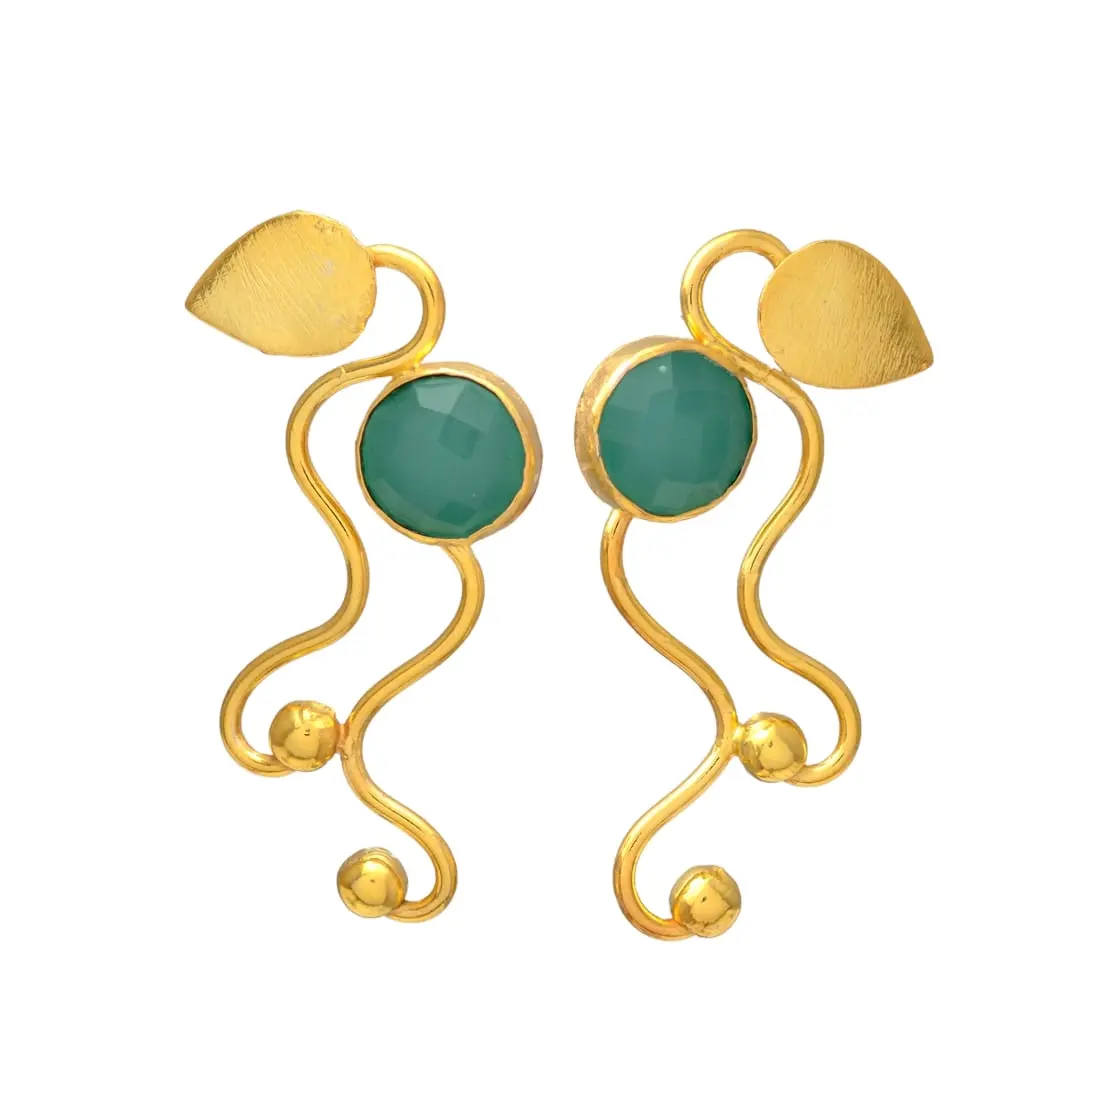 Dangle brass earring snake style with stone green color best option for good collection earring women and girls